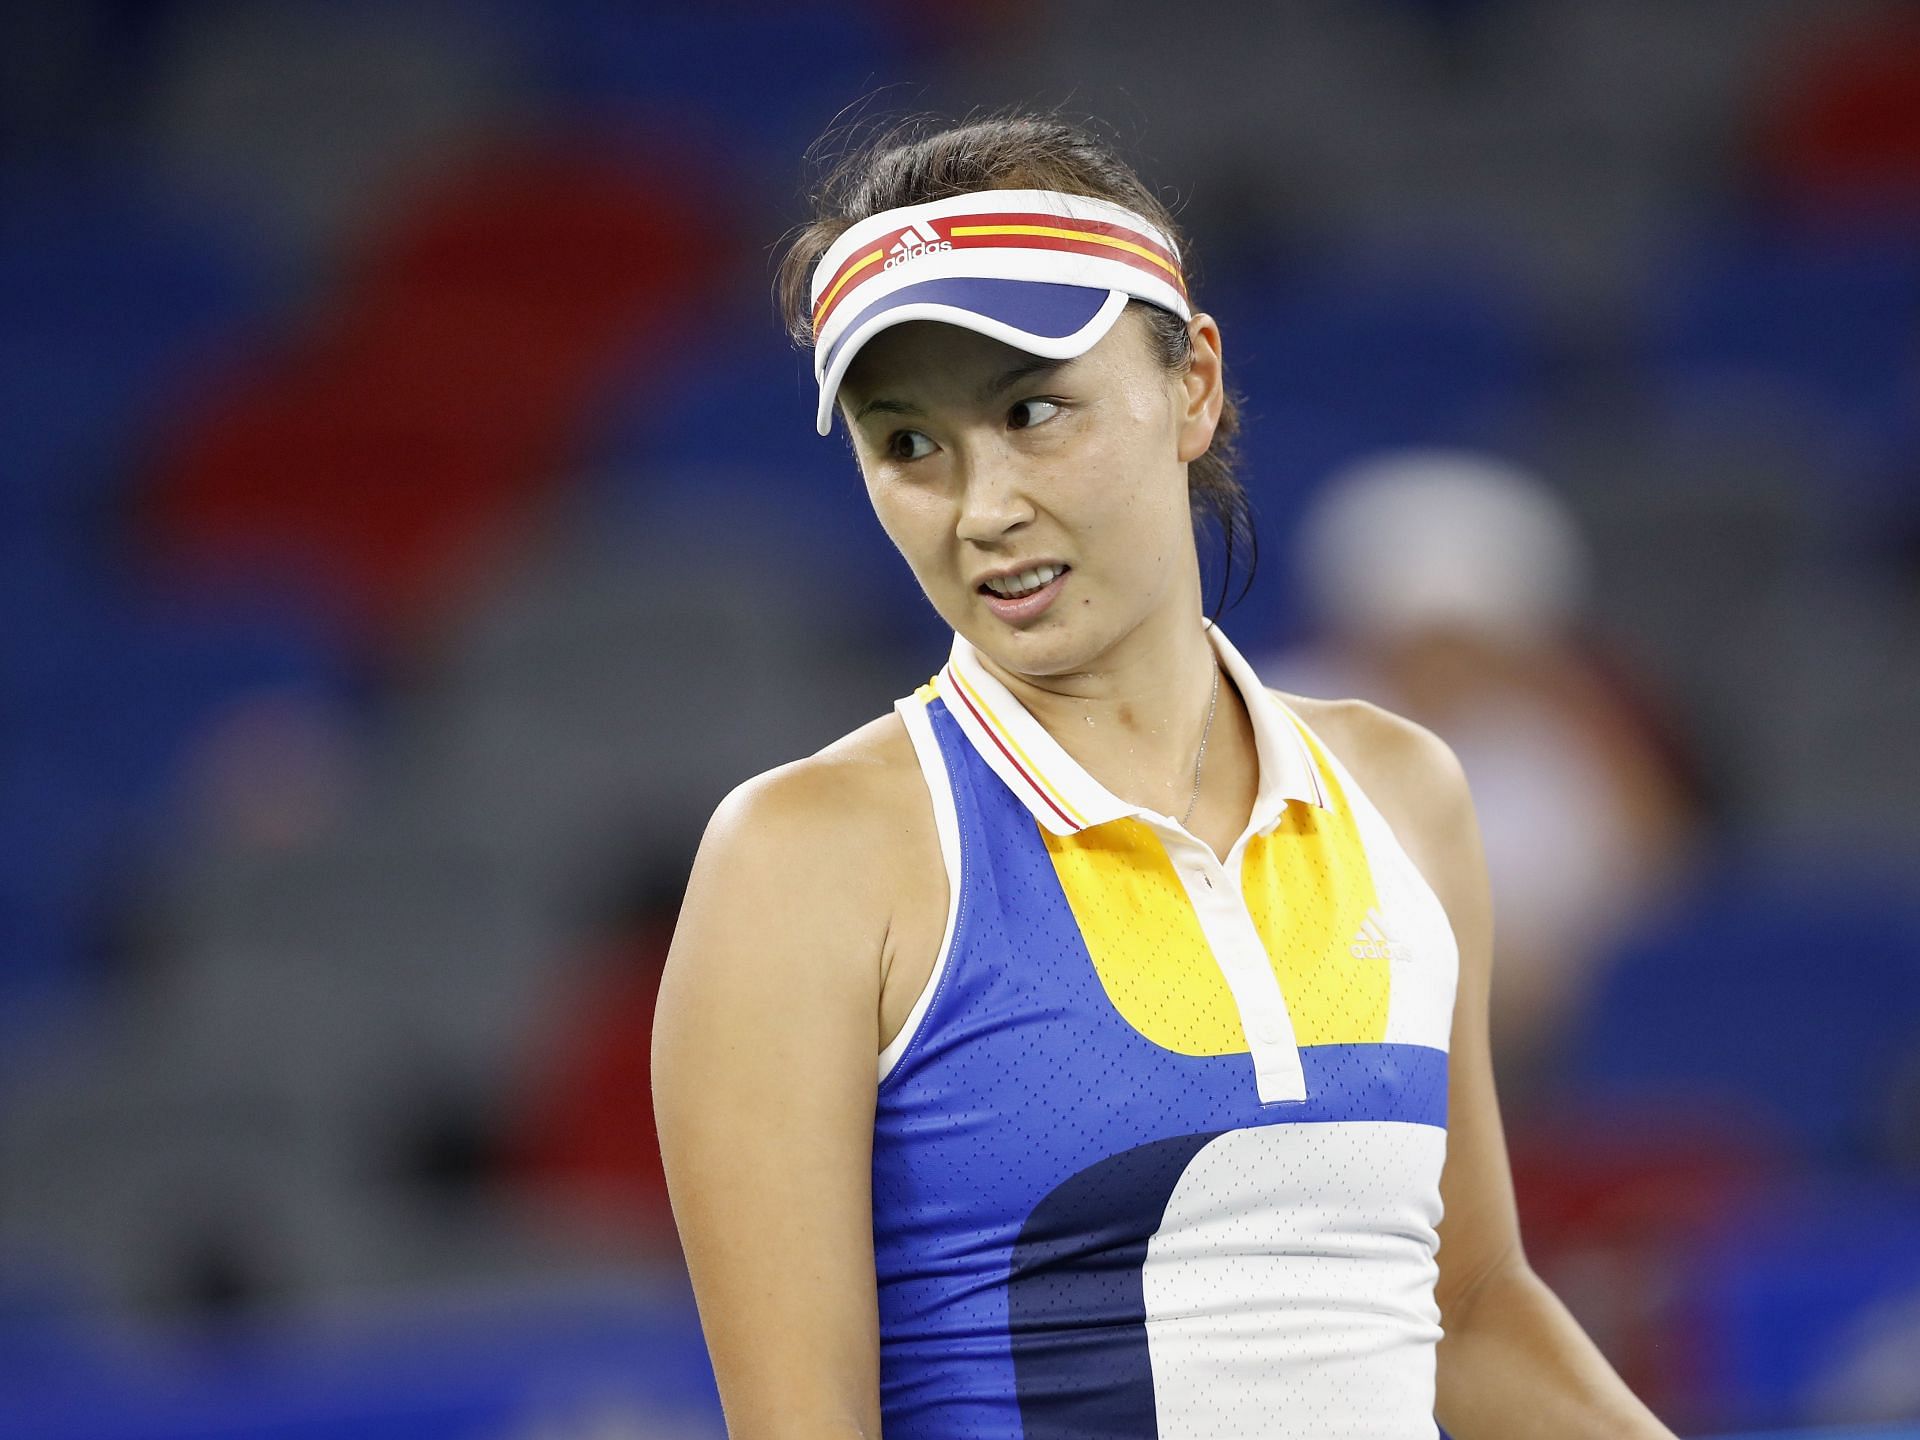 Peng Shuai&#039;s disappearance and resurfacing is the story of the season, all sports considered